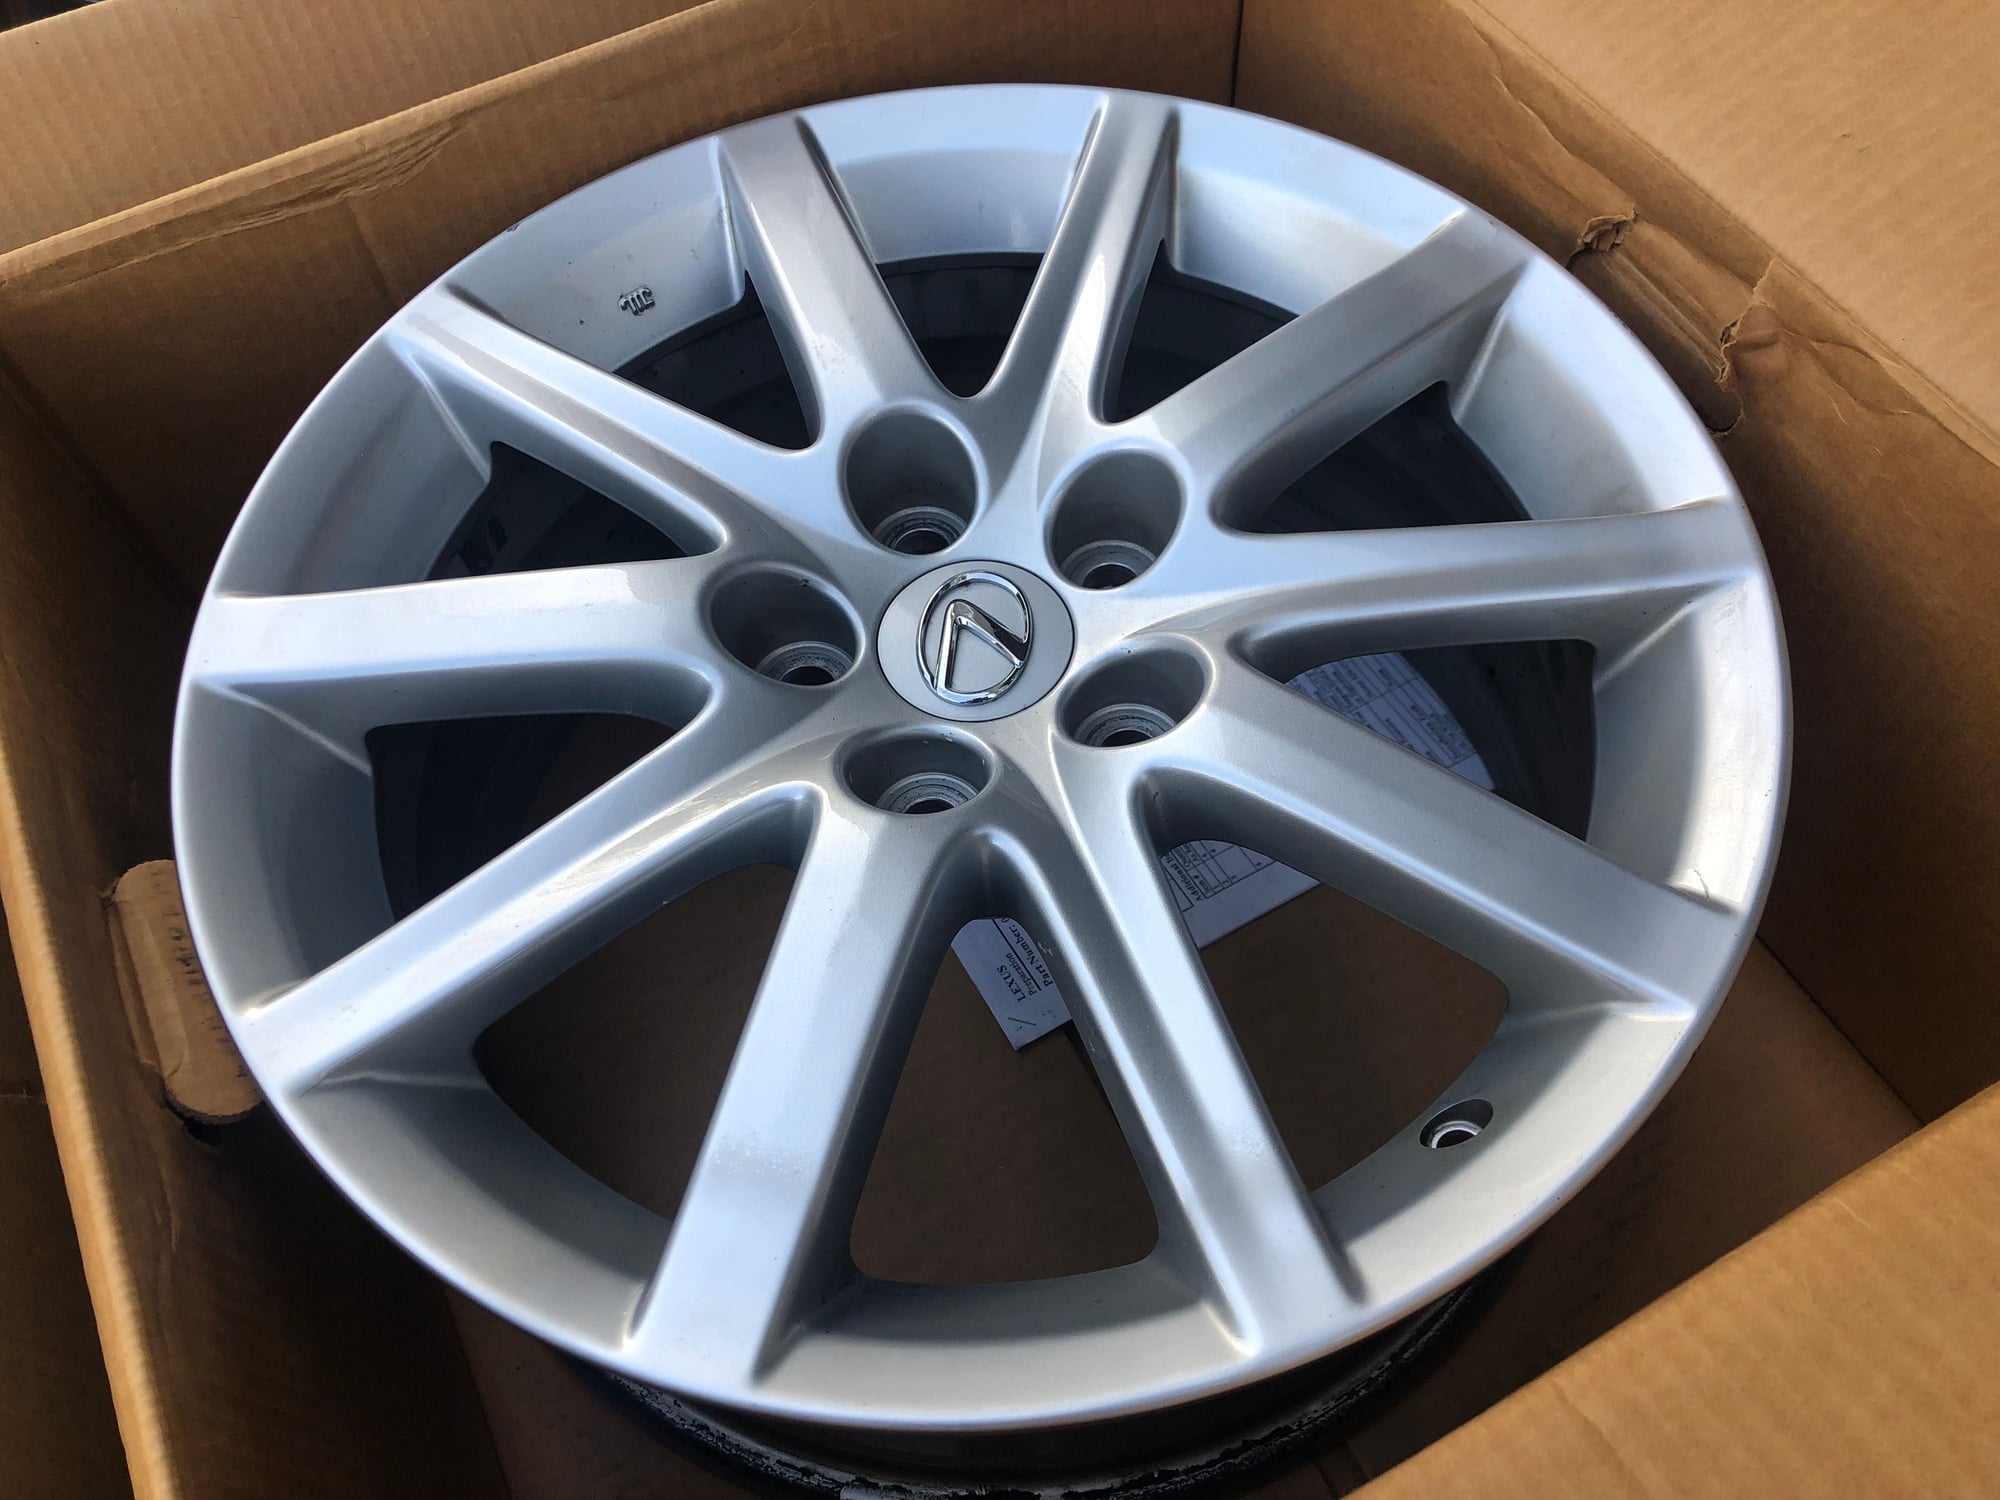 Wheels and Tires/Axles - FS: 2006 Lexus GS300 AWD Factory 17" Rims w/ Wheel Cover Caps - Used - 2006 to 2011 Lexus GS300 - Centreville, VA 20124, United States